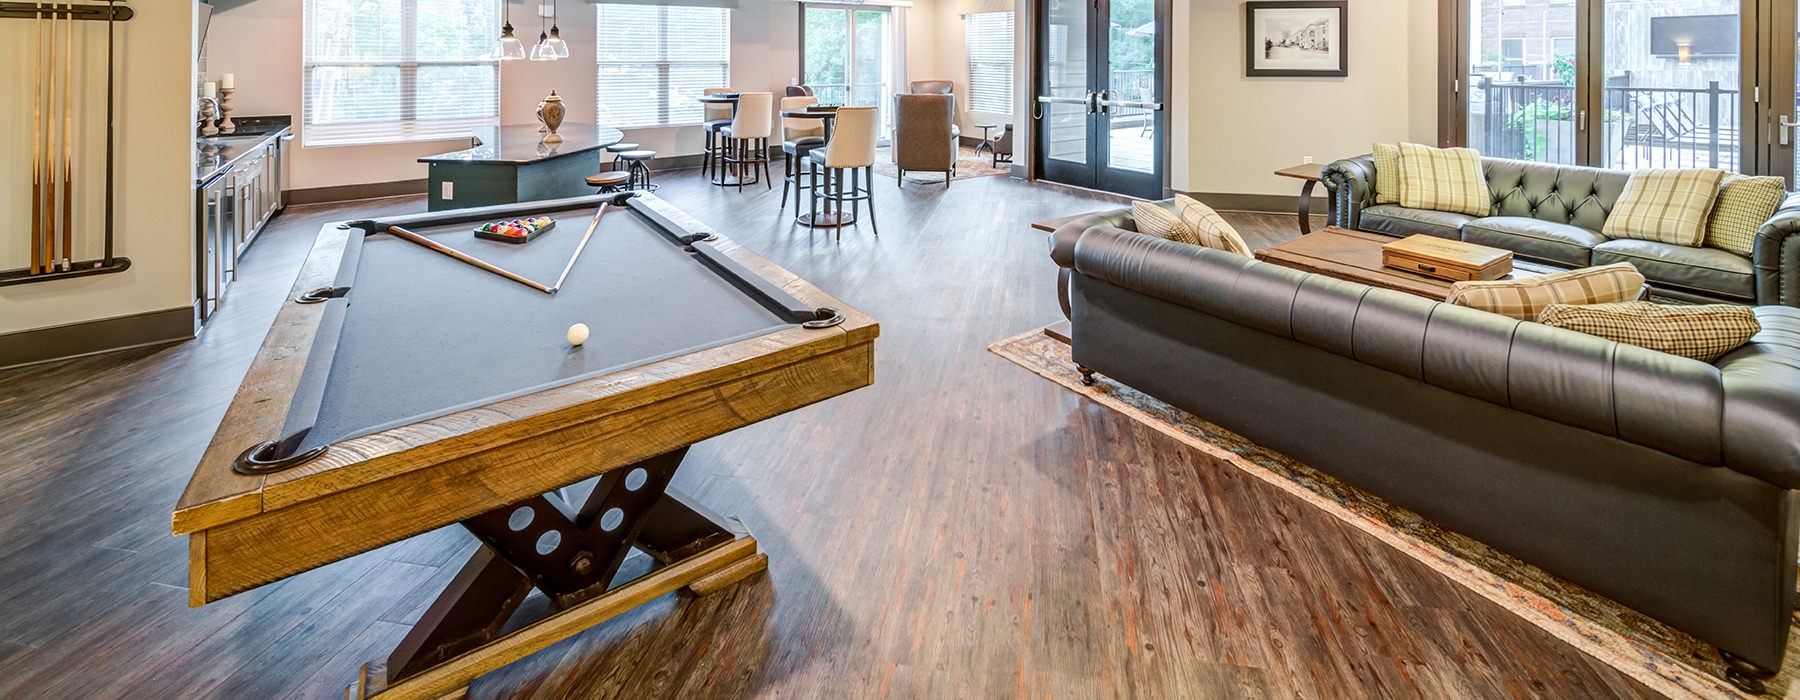 Spacious and well lit game room with billiard table and large windows 